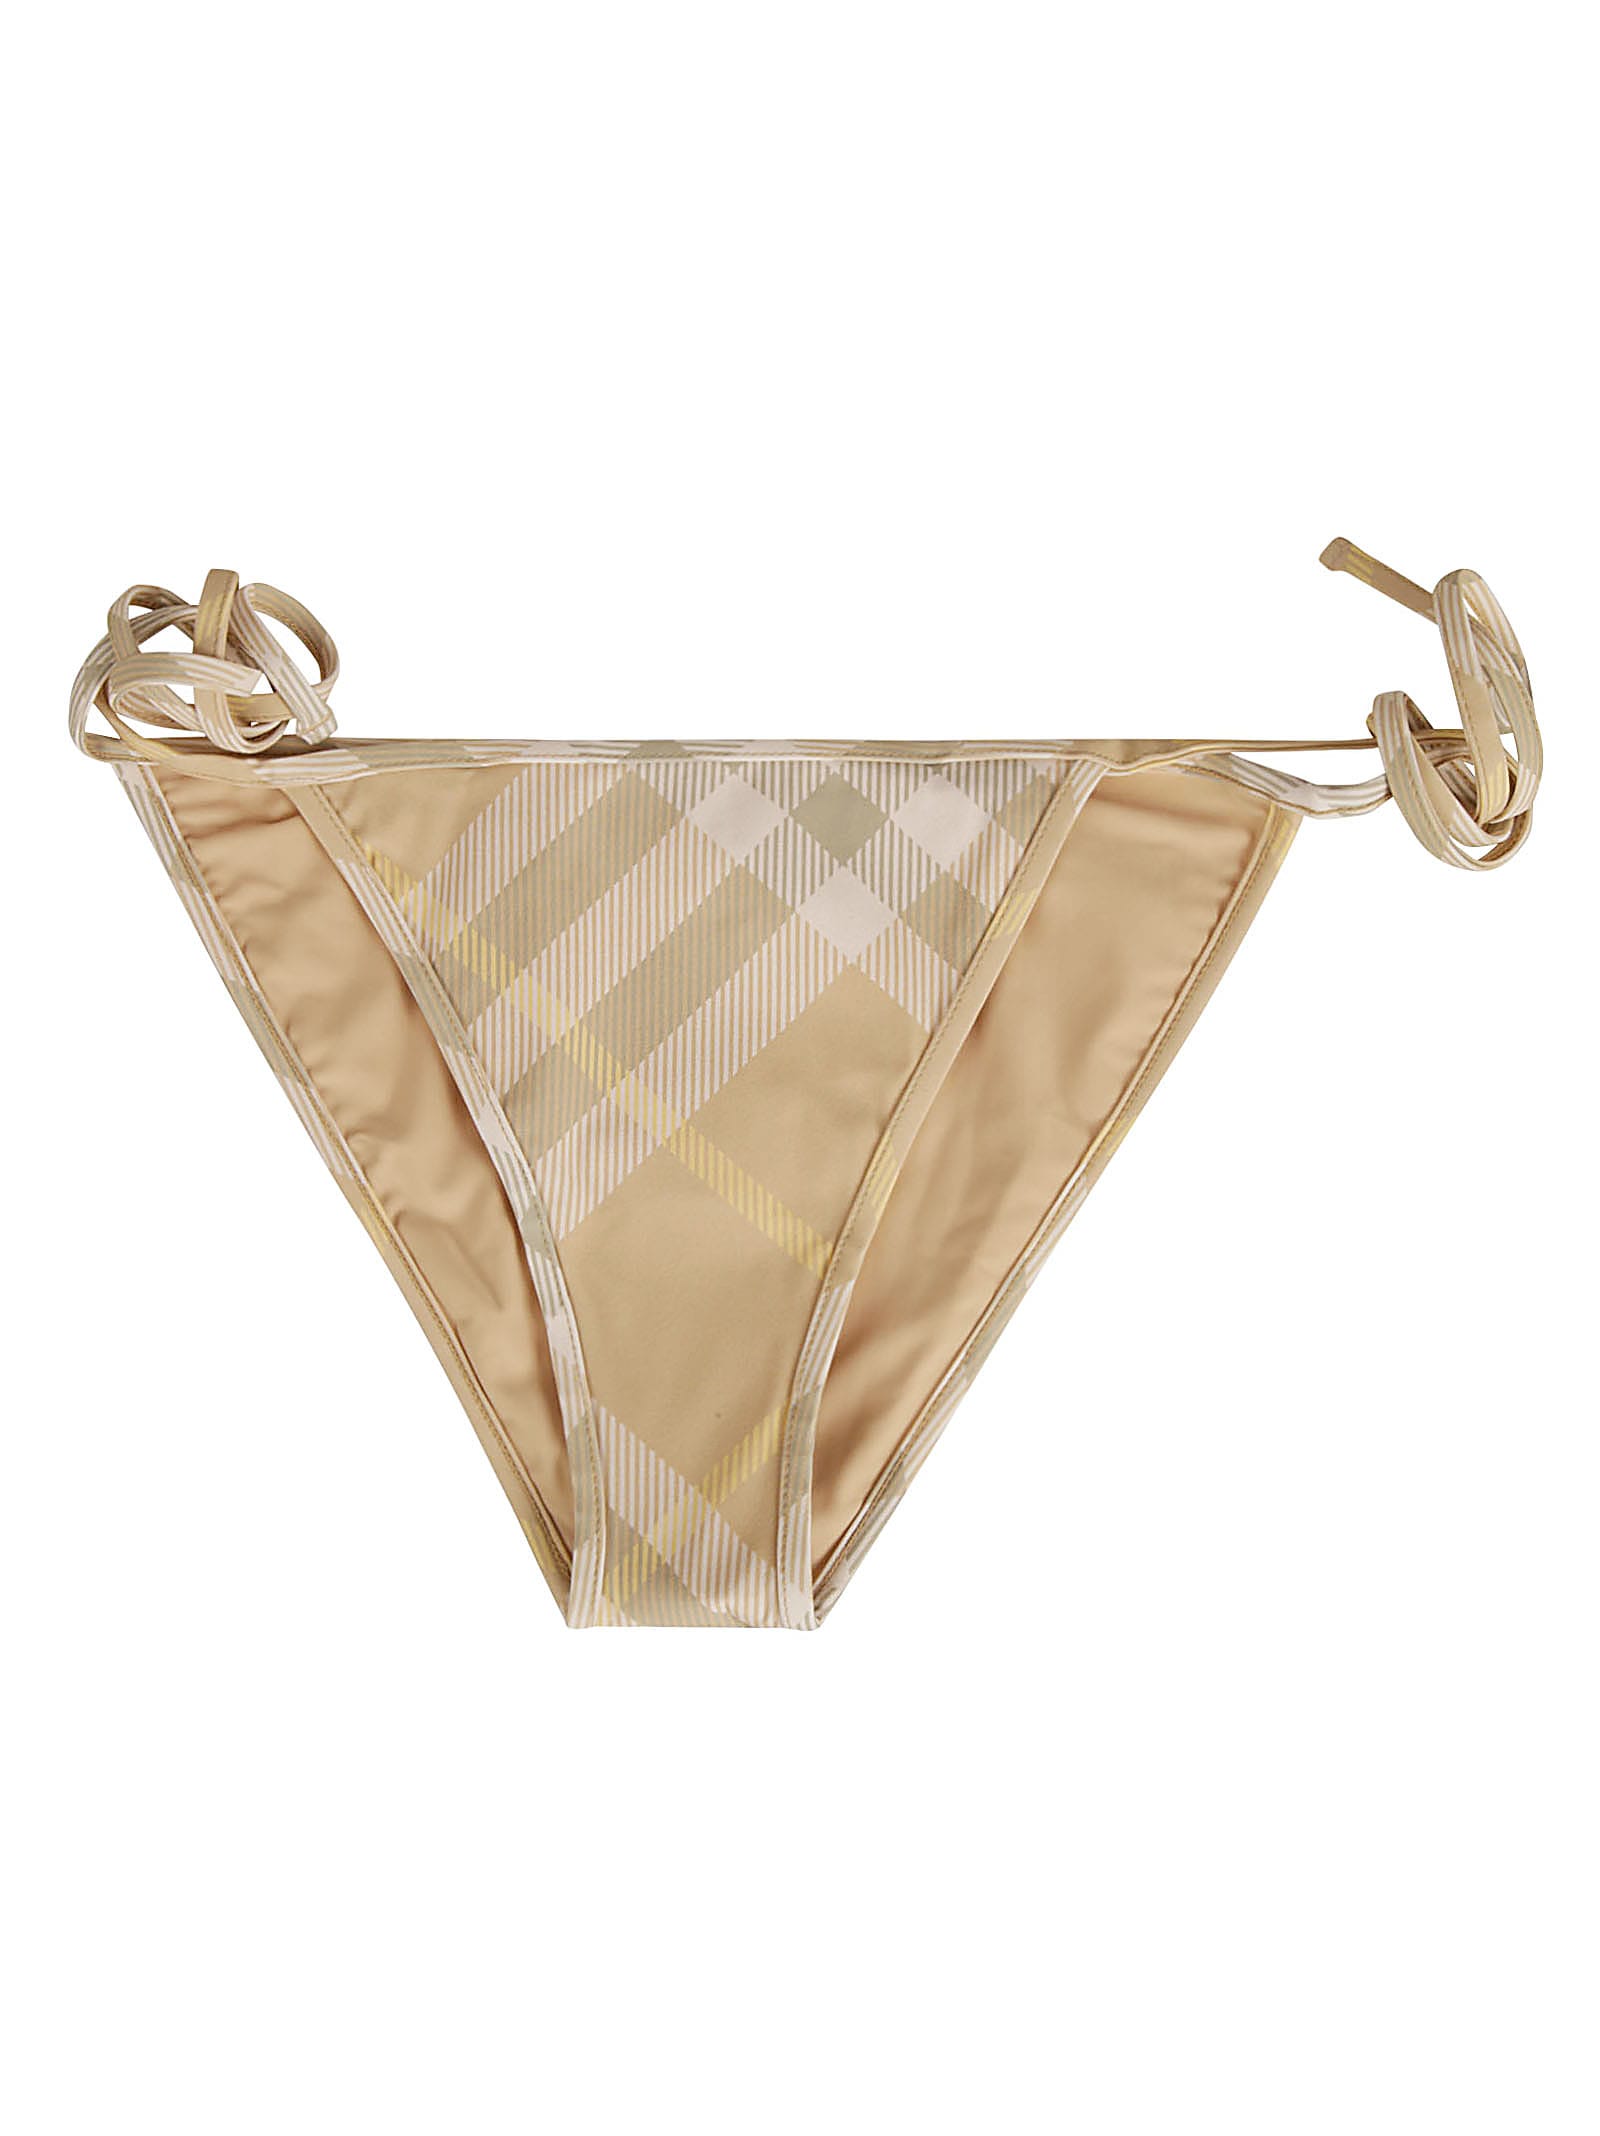 Burberry Check Patterned Bikini Bottoms In Flax Ip Check